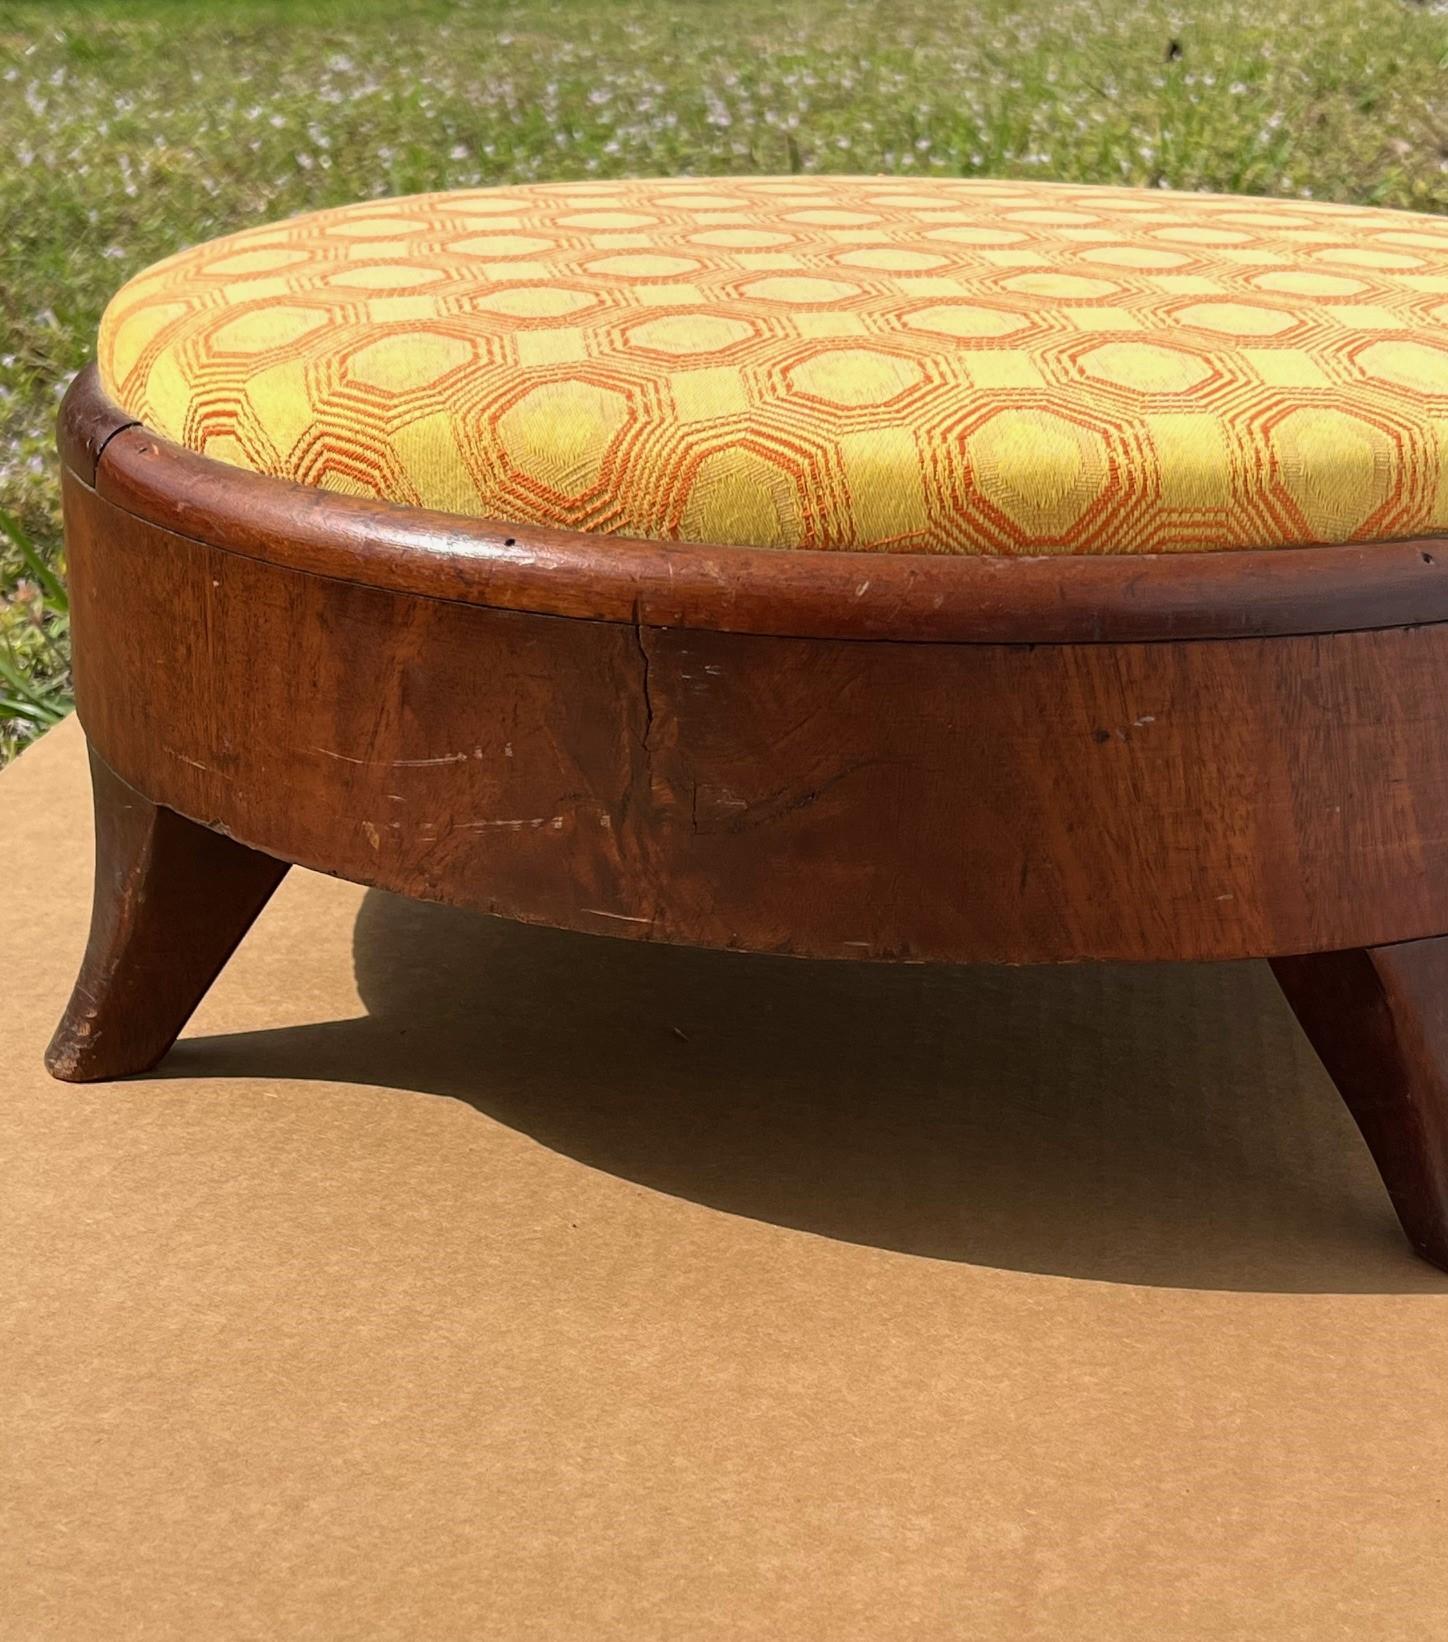 19th Century American Empire Round Upholstered Footstool.

Round, footed stool with rich mahogany wood veneer stands on four short, hand-carved, flared and graduated legs.  A great room accessory.
Condition is good antique.  Wear commensurate with